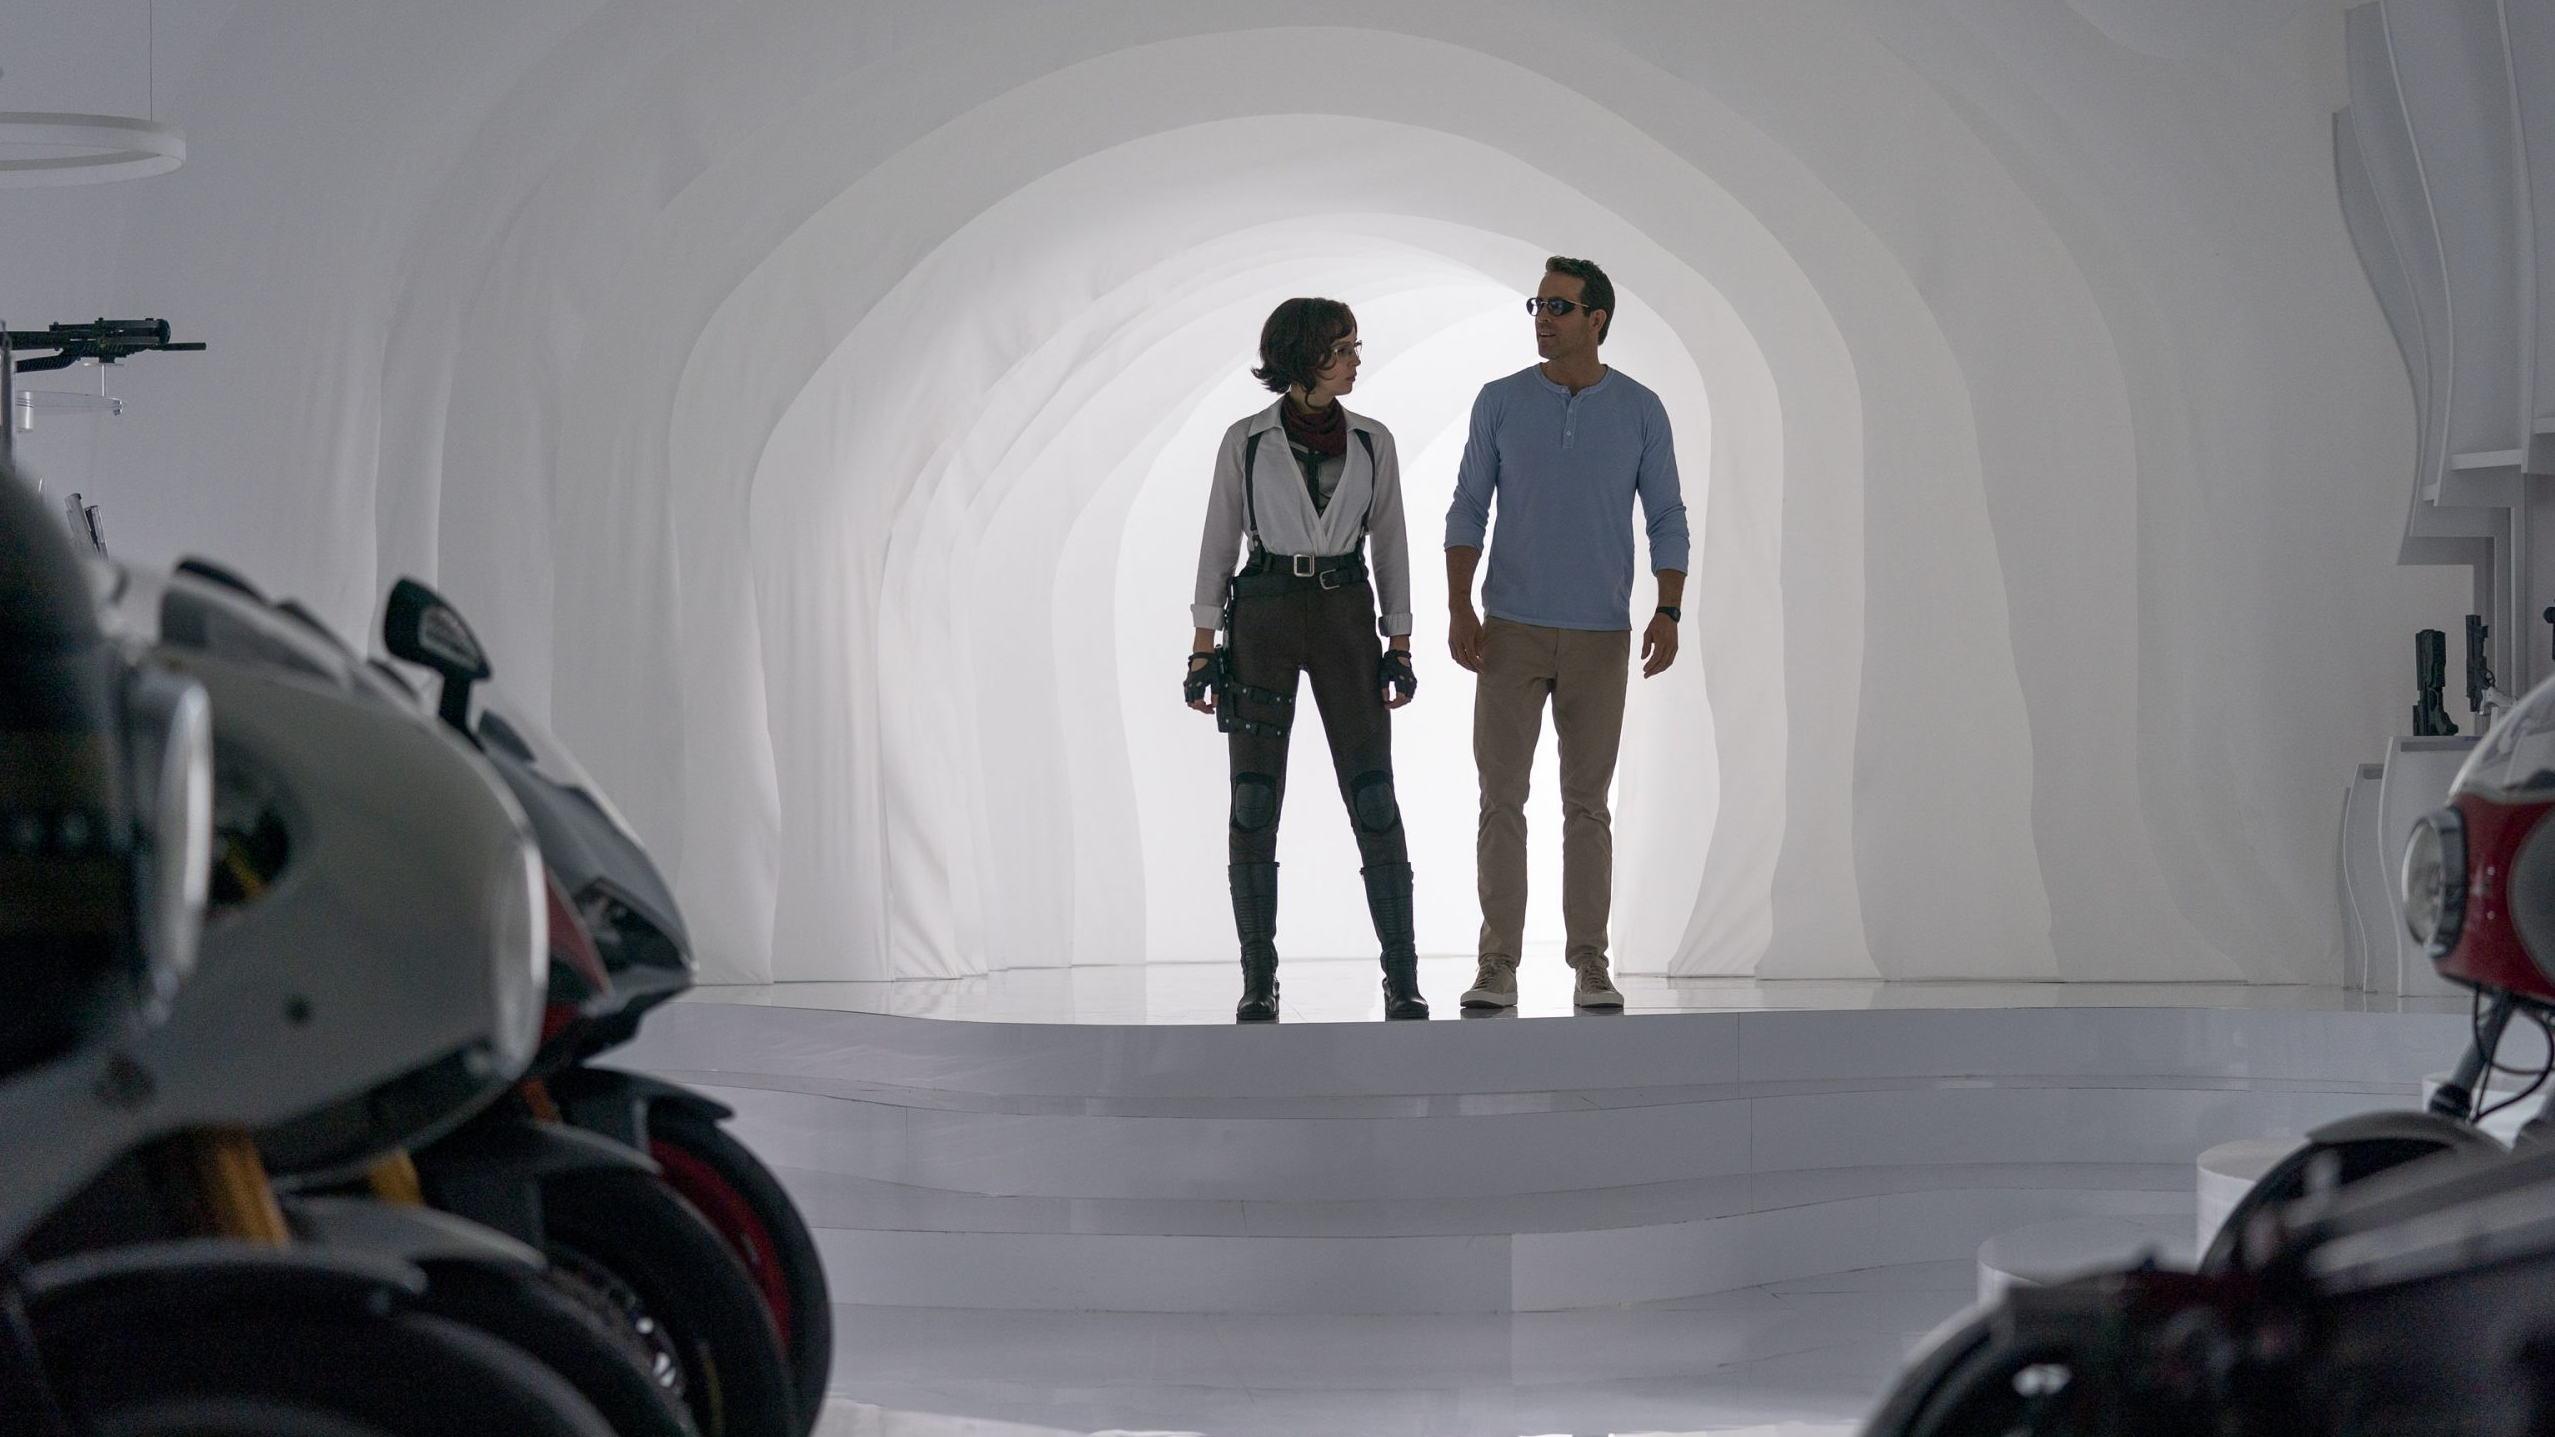 Jodie Comer as Molotov Girl and Ryan Reynolds as Guy enter a room filled with weapons and motorcycles through a white portal as seen in FREE GUY written by Matt Lieberman. 